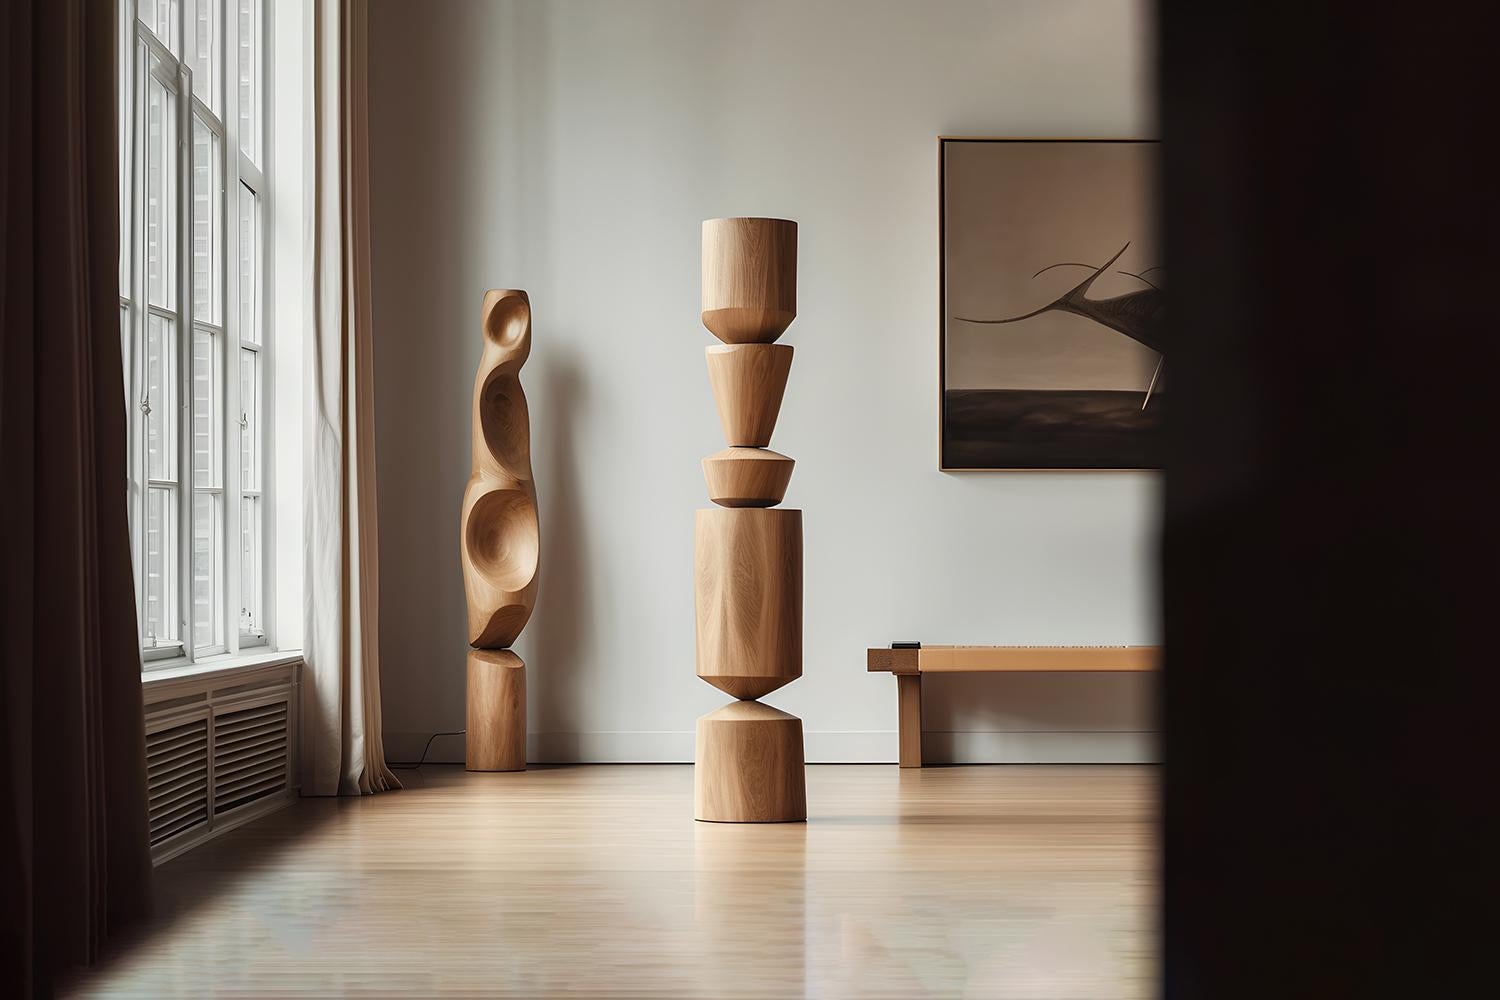 Mid-Century Modern Still Stand No28: Artistic Tranquility in Oak Standing Totem by NONO For Sale